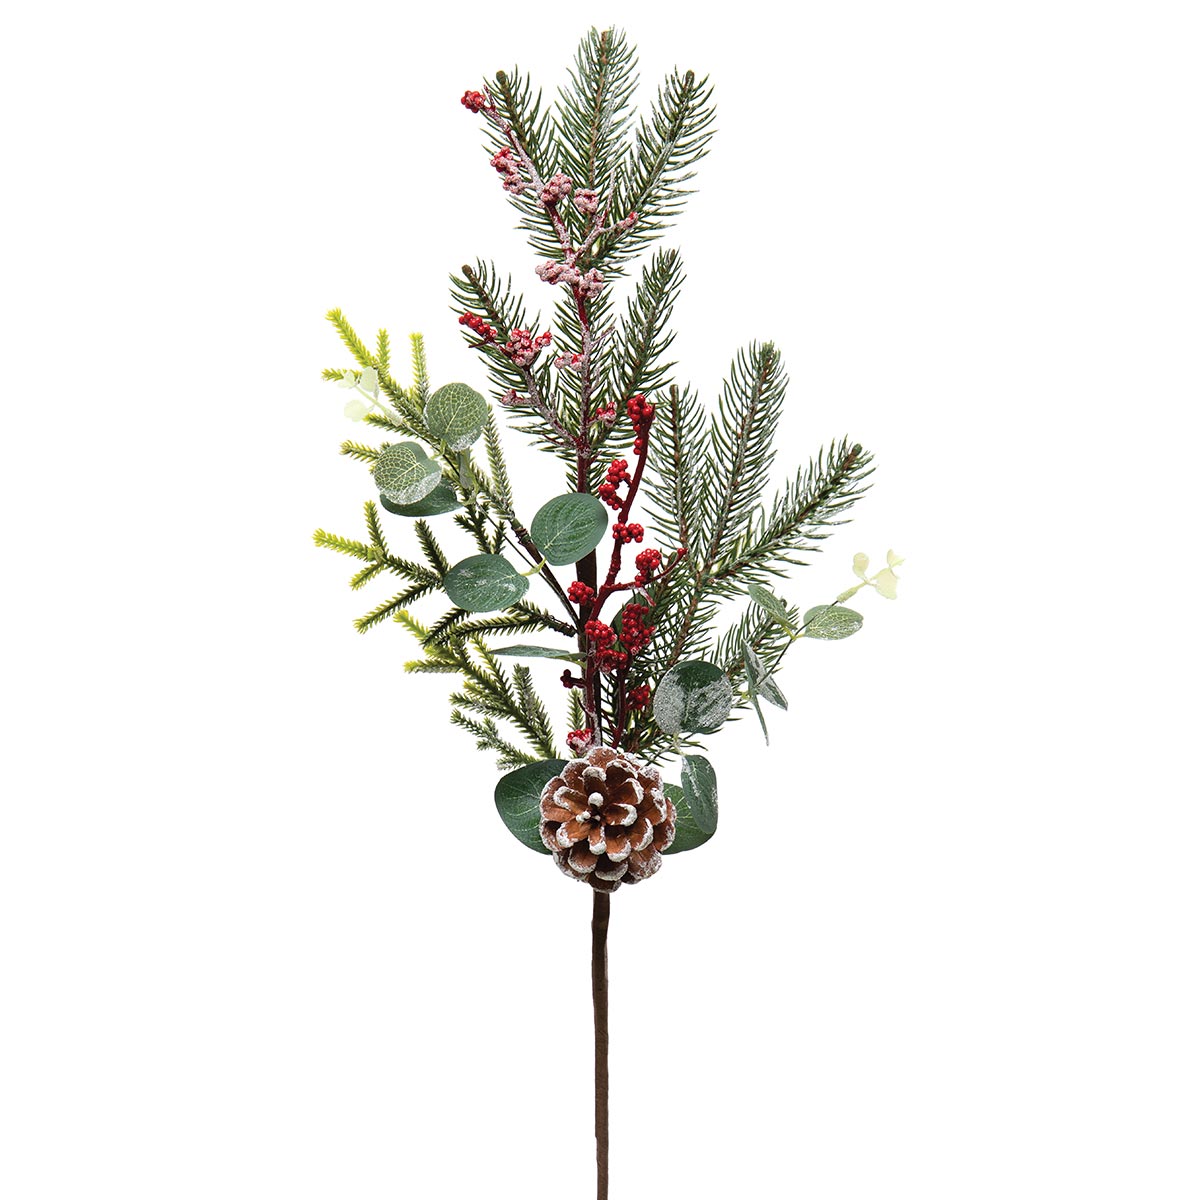 !HOLIDAY BERRY SPRAY WITH RED BERRIES, PINE, EUCALYPTUS